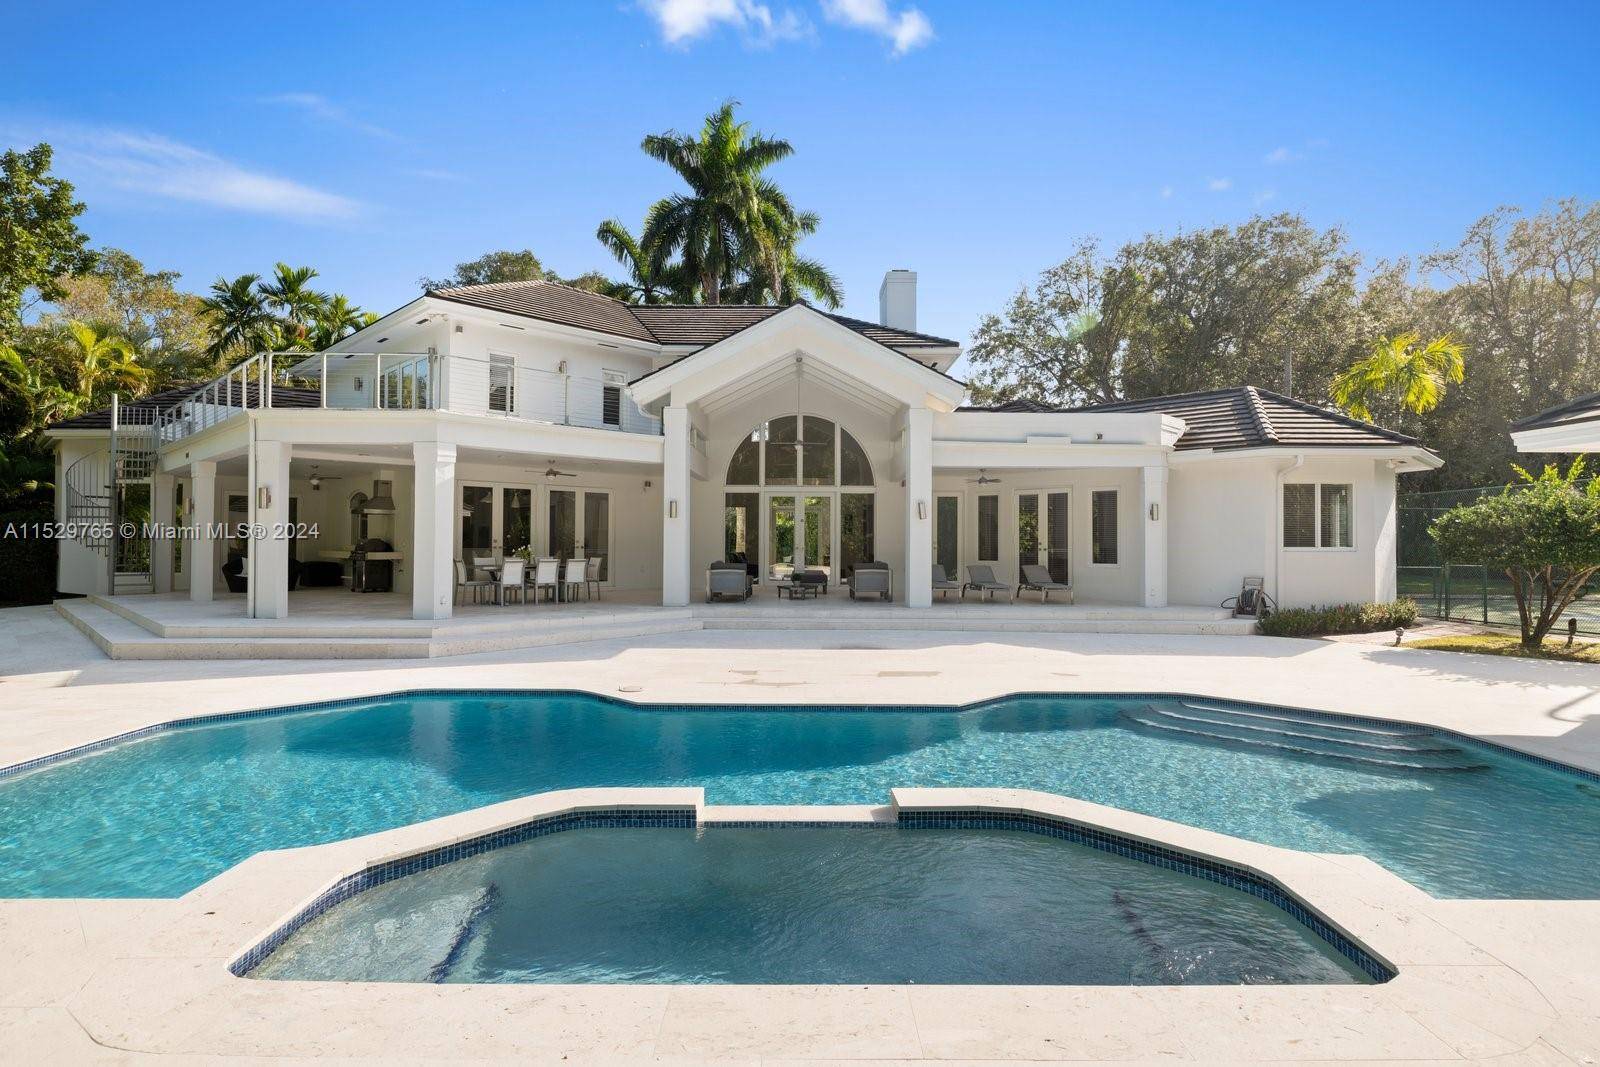 Located within the prestigious North Pinecrest area, this contemporary estate radiates sophistication and privacy.